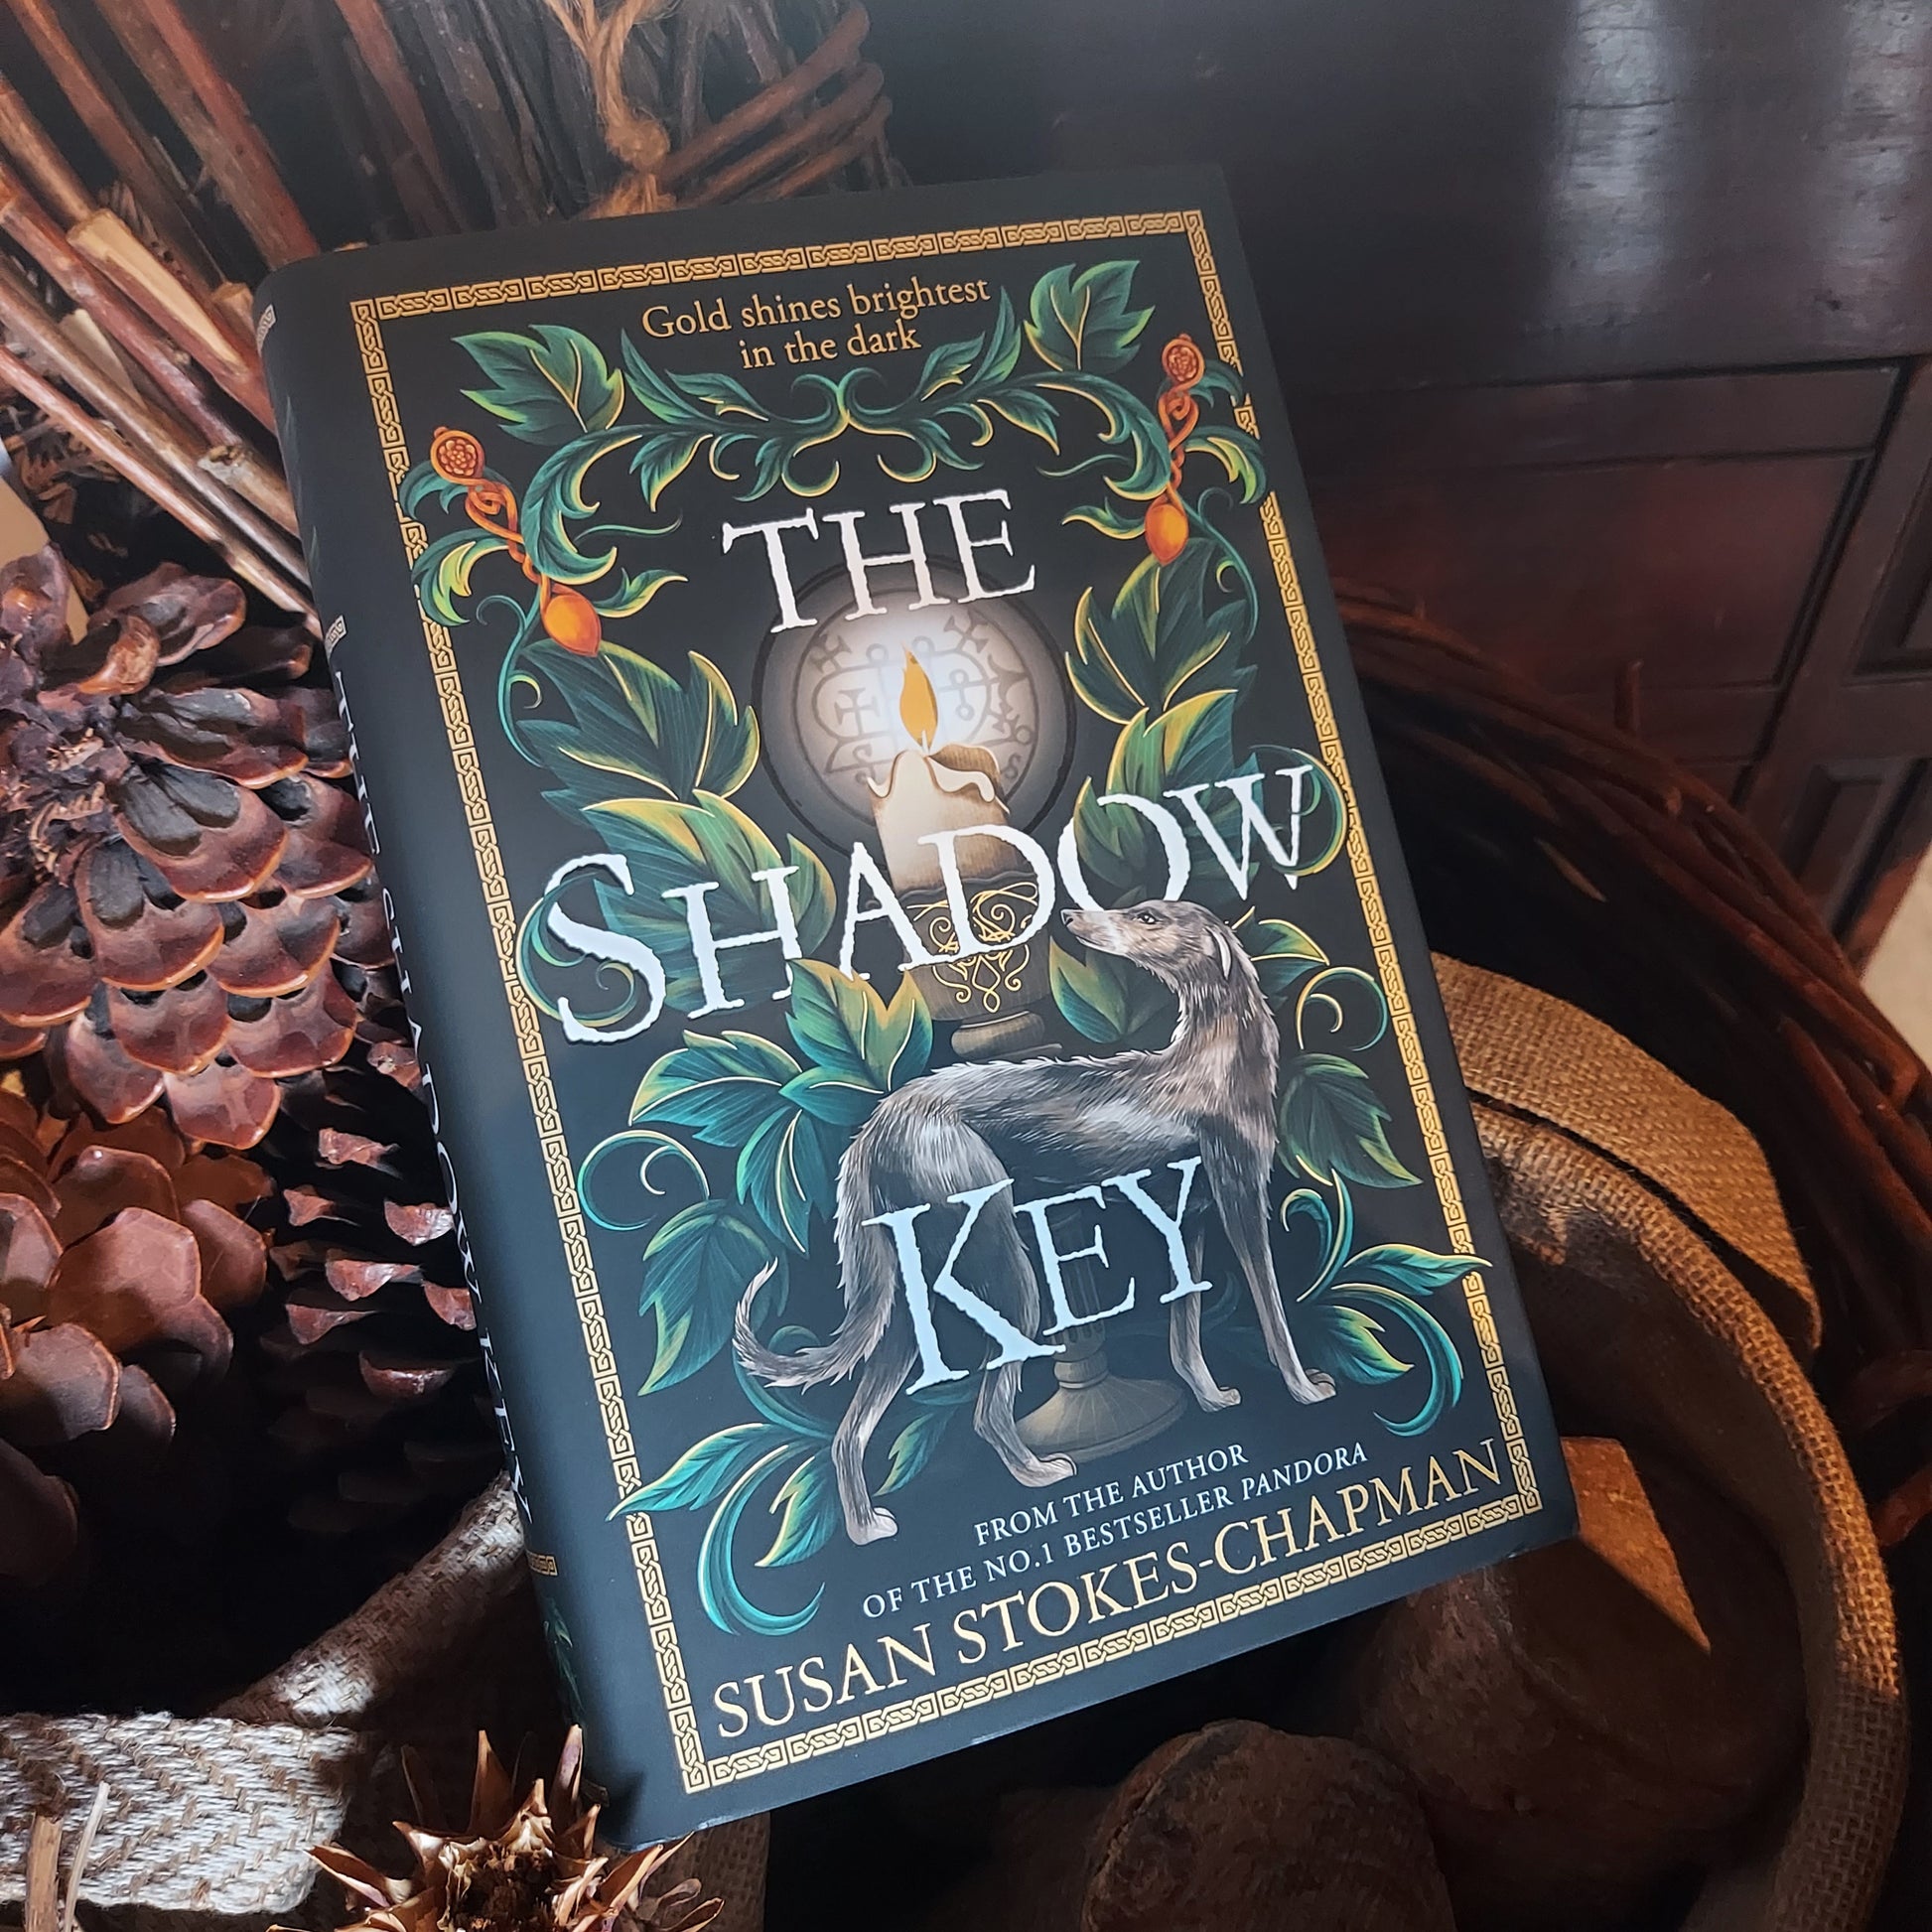 A copy of the shadow key nestled in a basket in the museum's herb garret